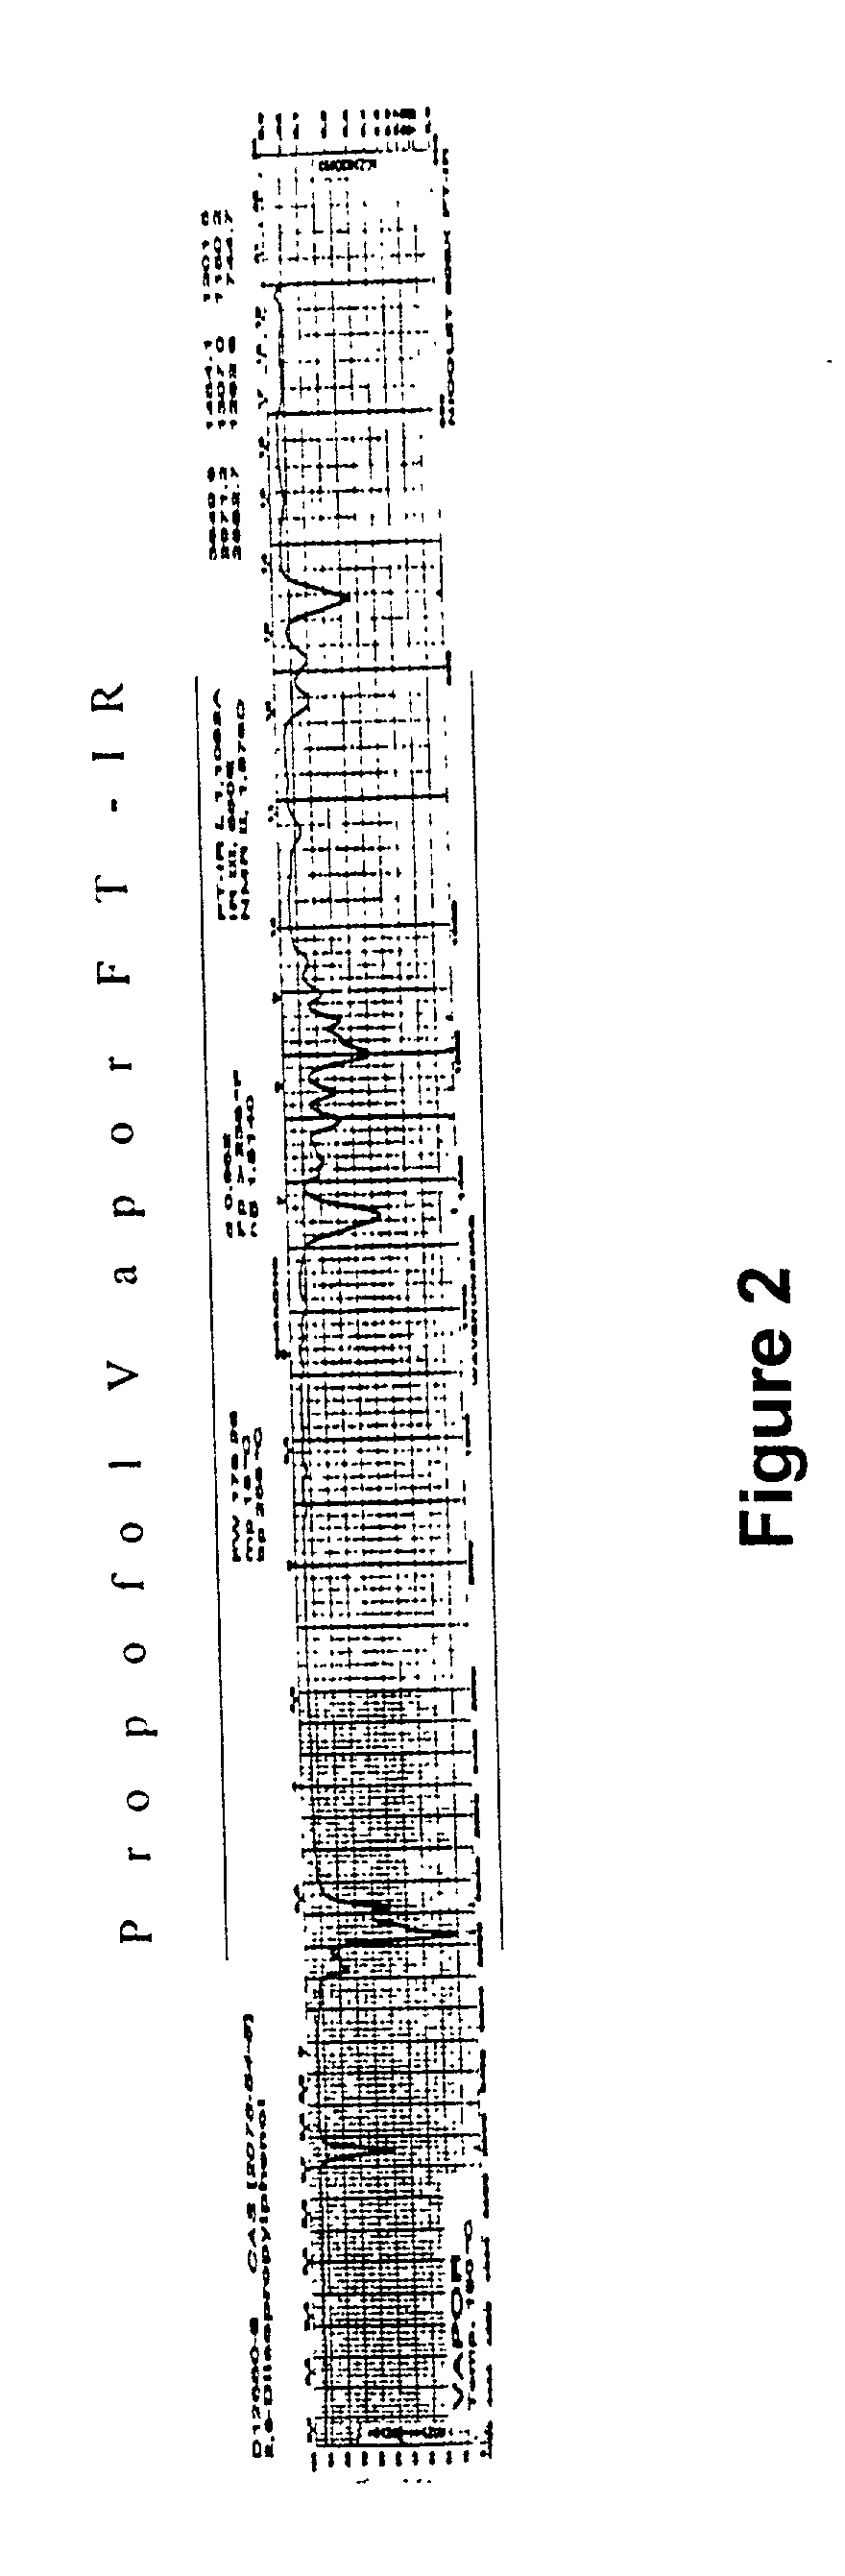 Method and apparatus for monitoring intravenous (IV) drug concentration using exhaled breath